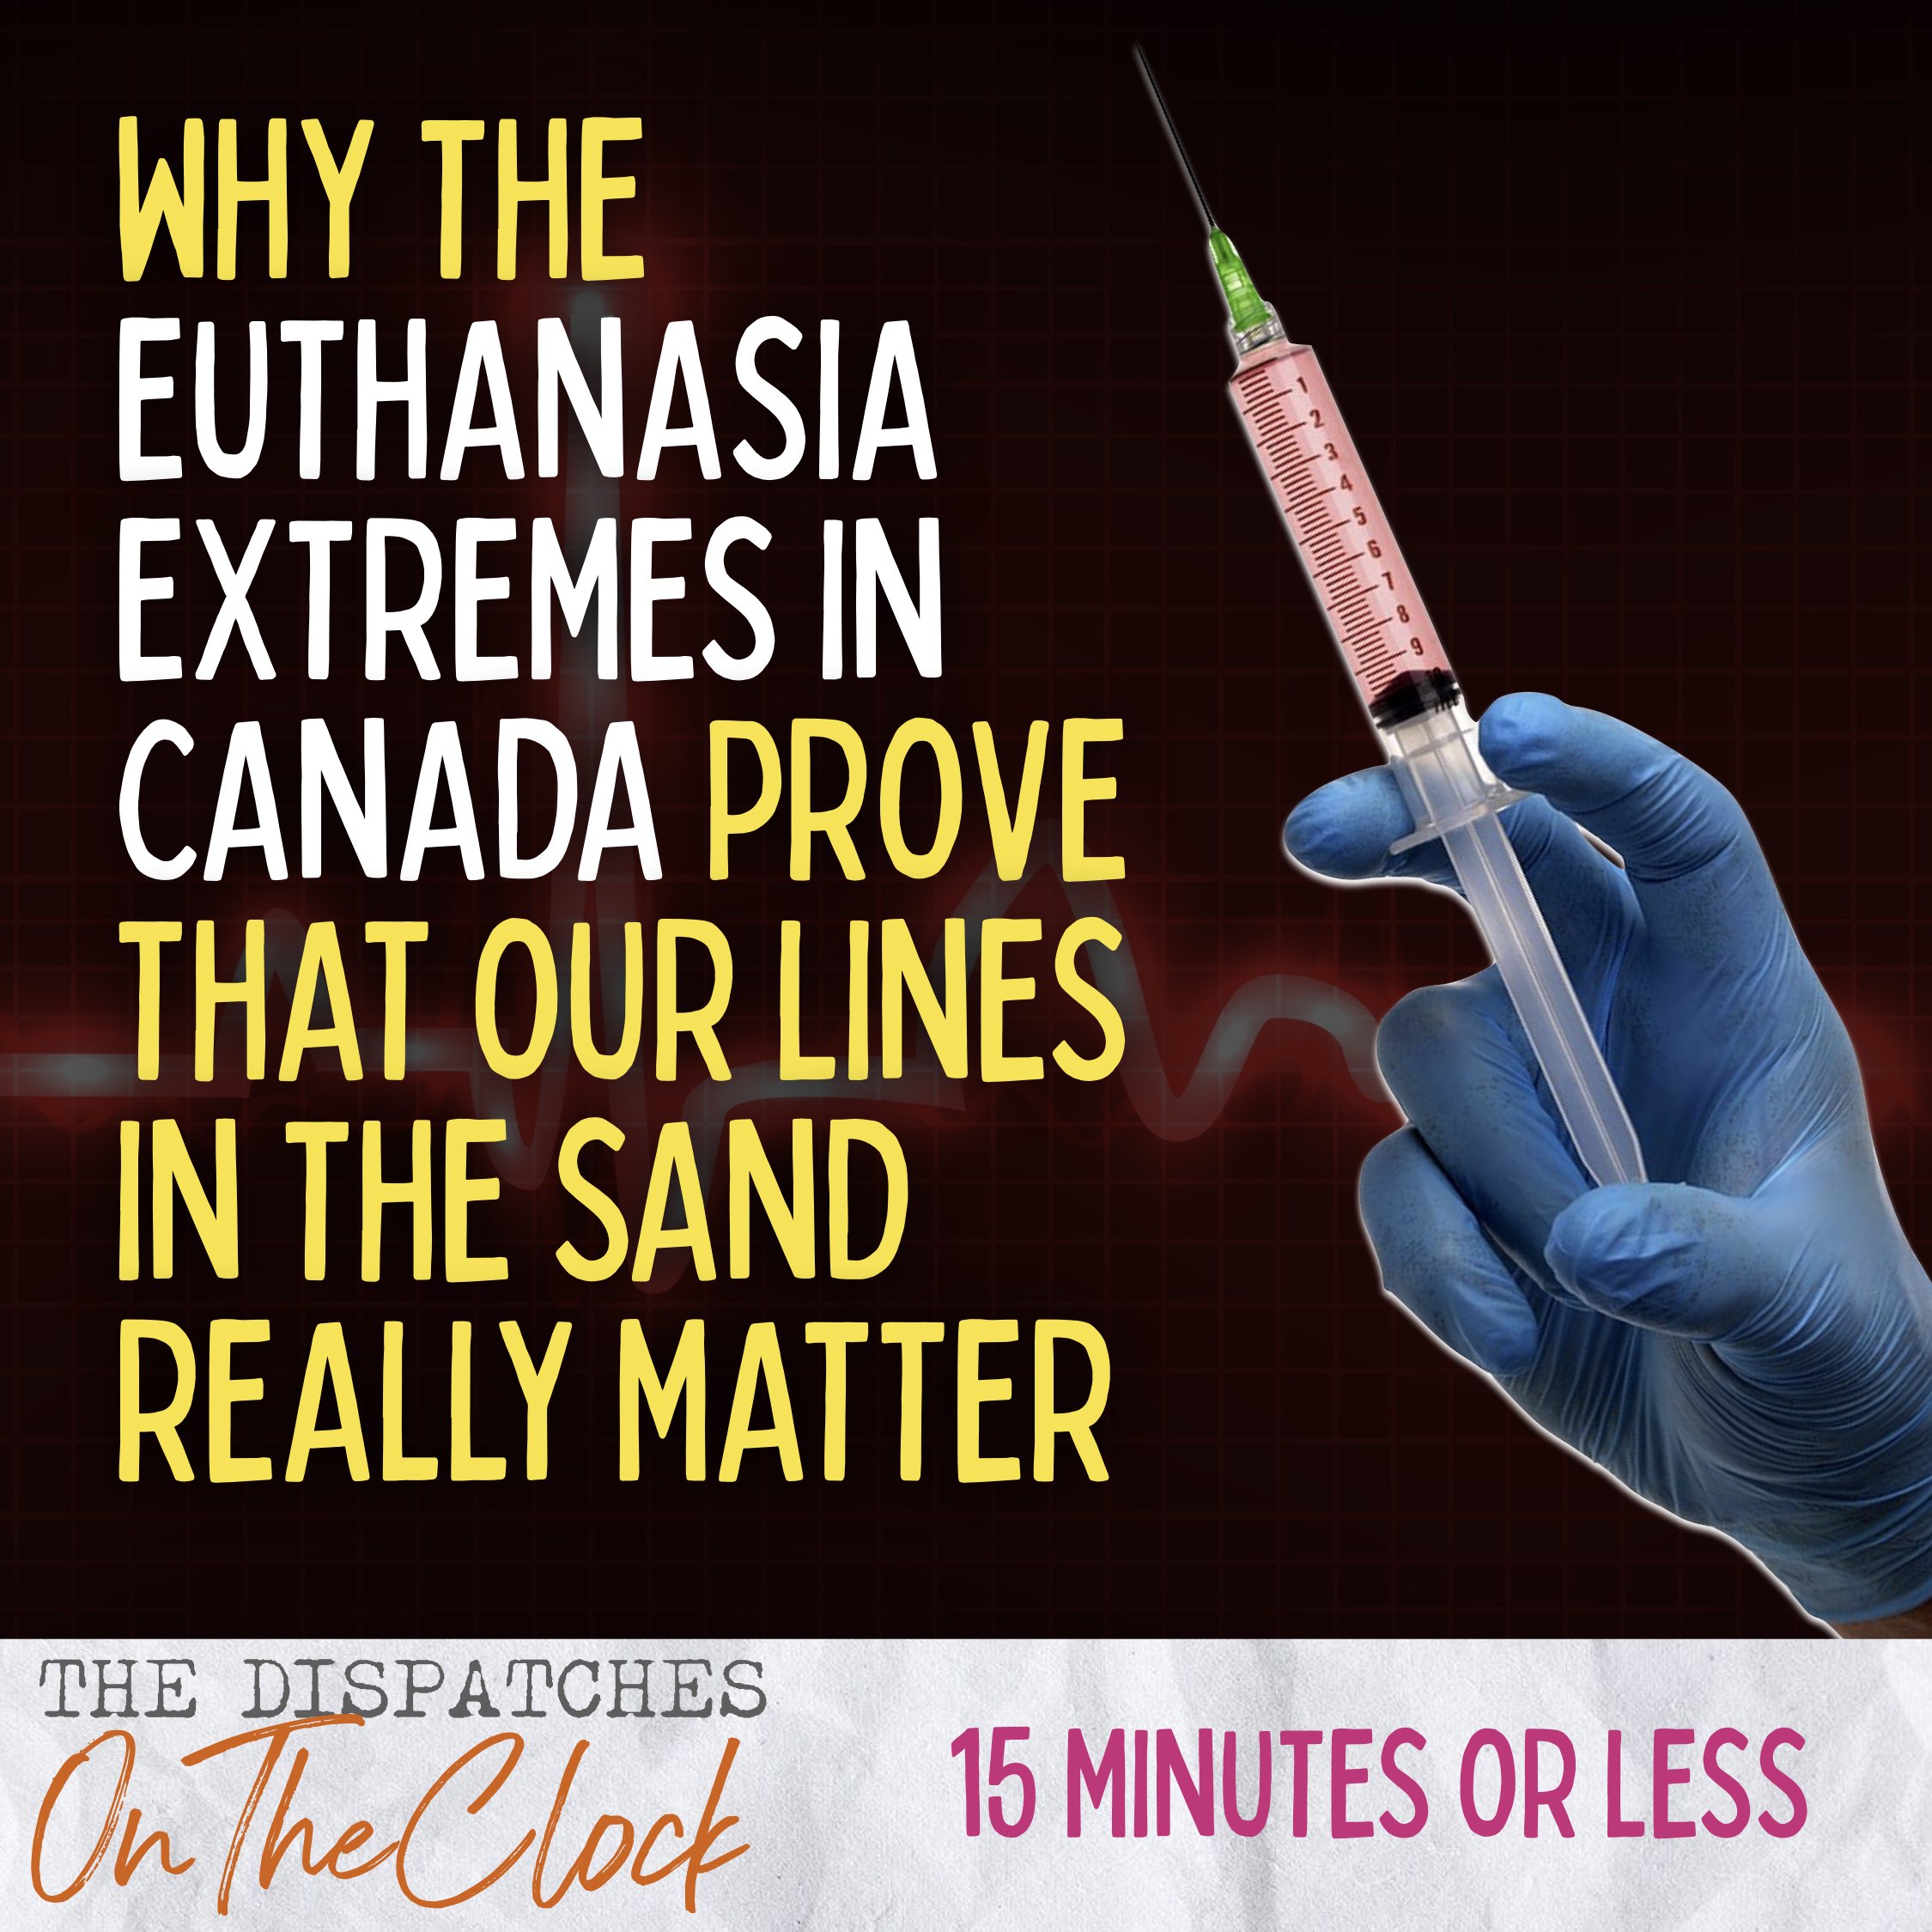 ON THE CLOCK | Why the euthanasia extremes in Canada prove that our lines in the sand REALLY matter